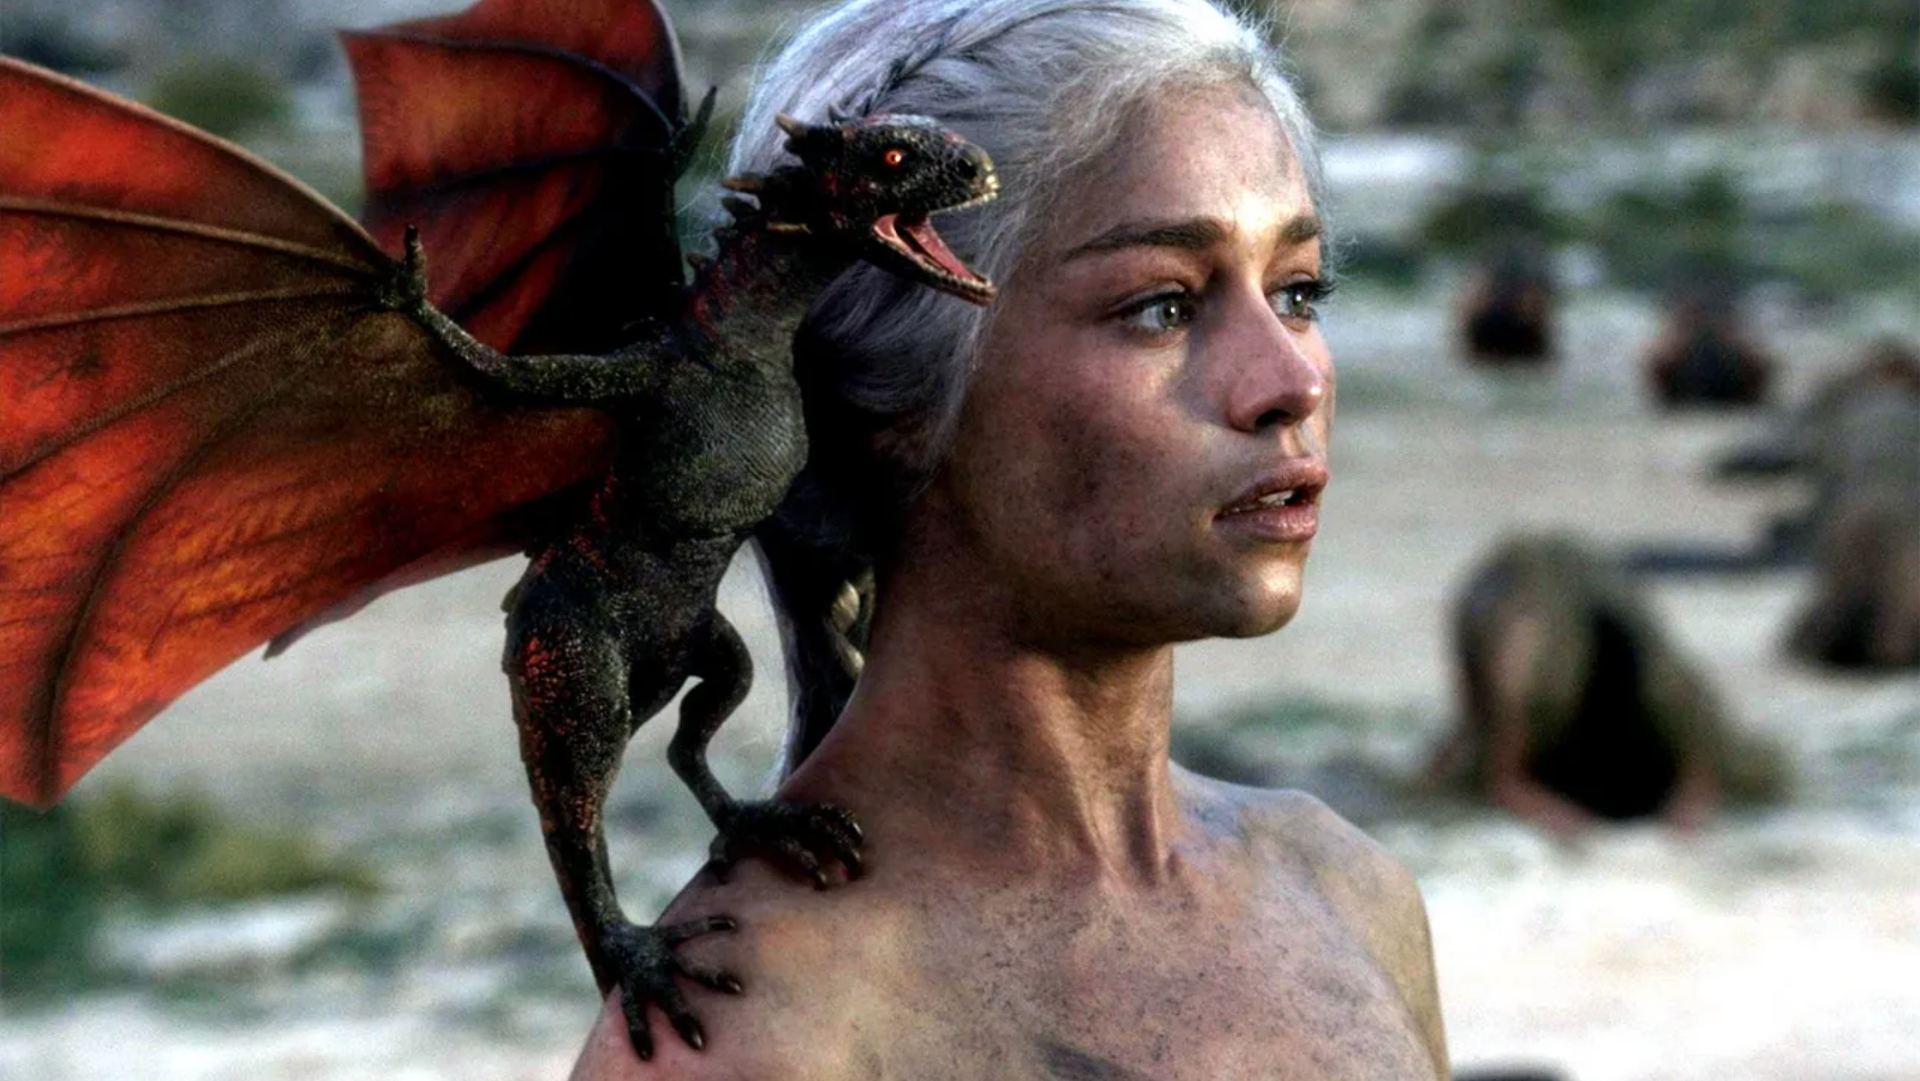 How House of the Dragon saved Game of Thrones' legacy